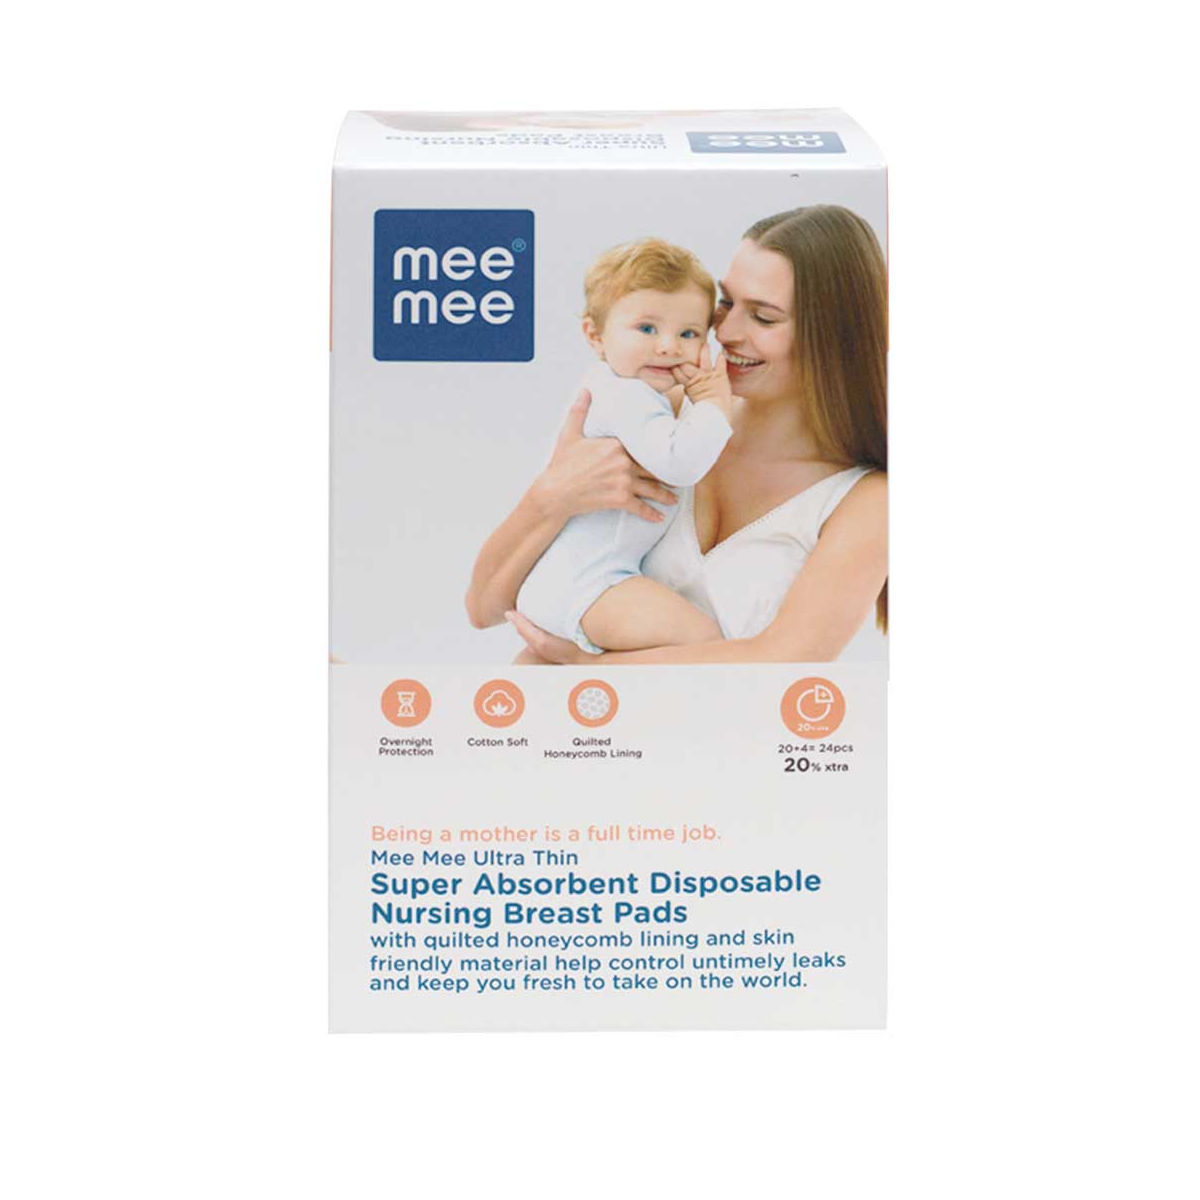 Mee Mee Ultra Thin Super Absorbent Disposable Nursing Breast Pads - 24 Pcs